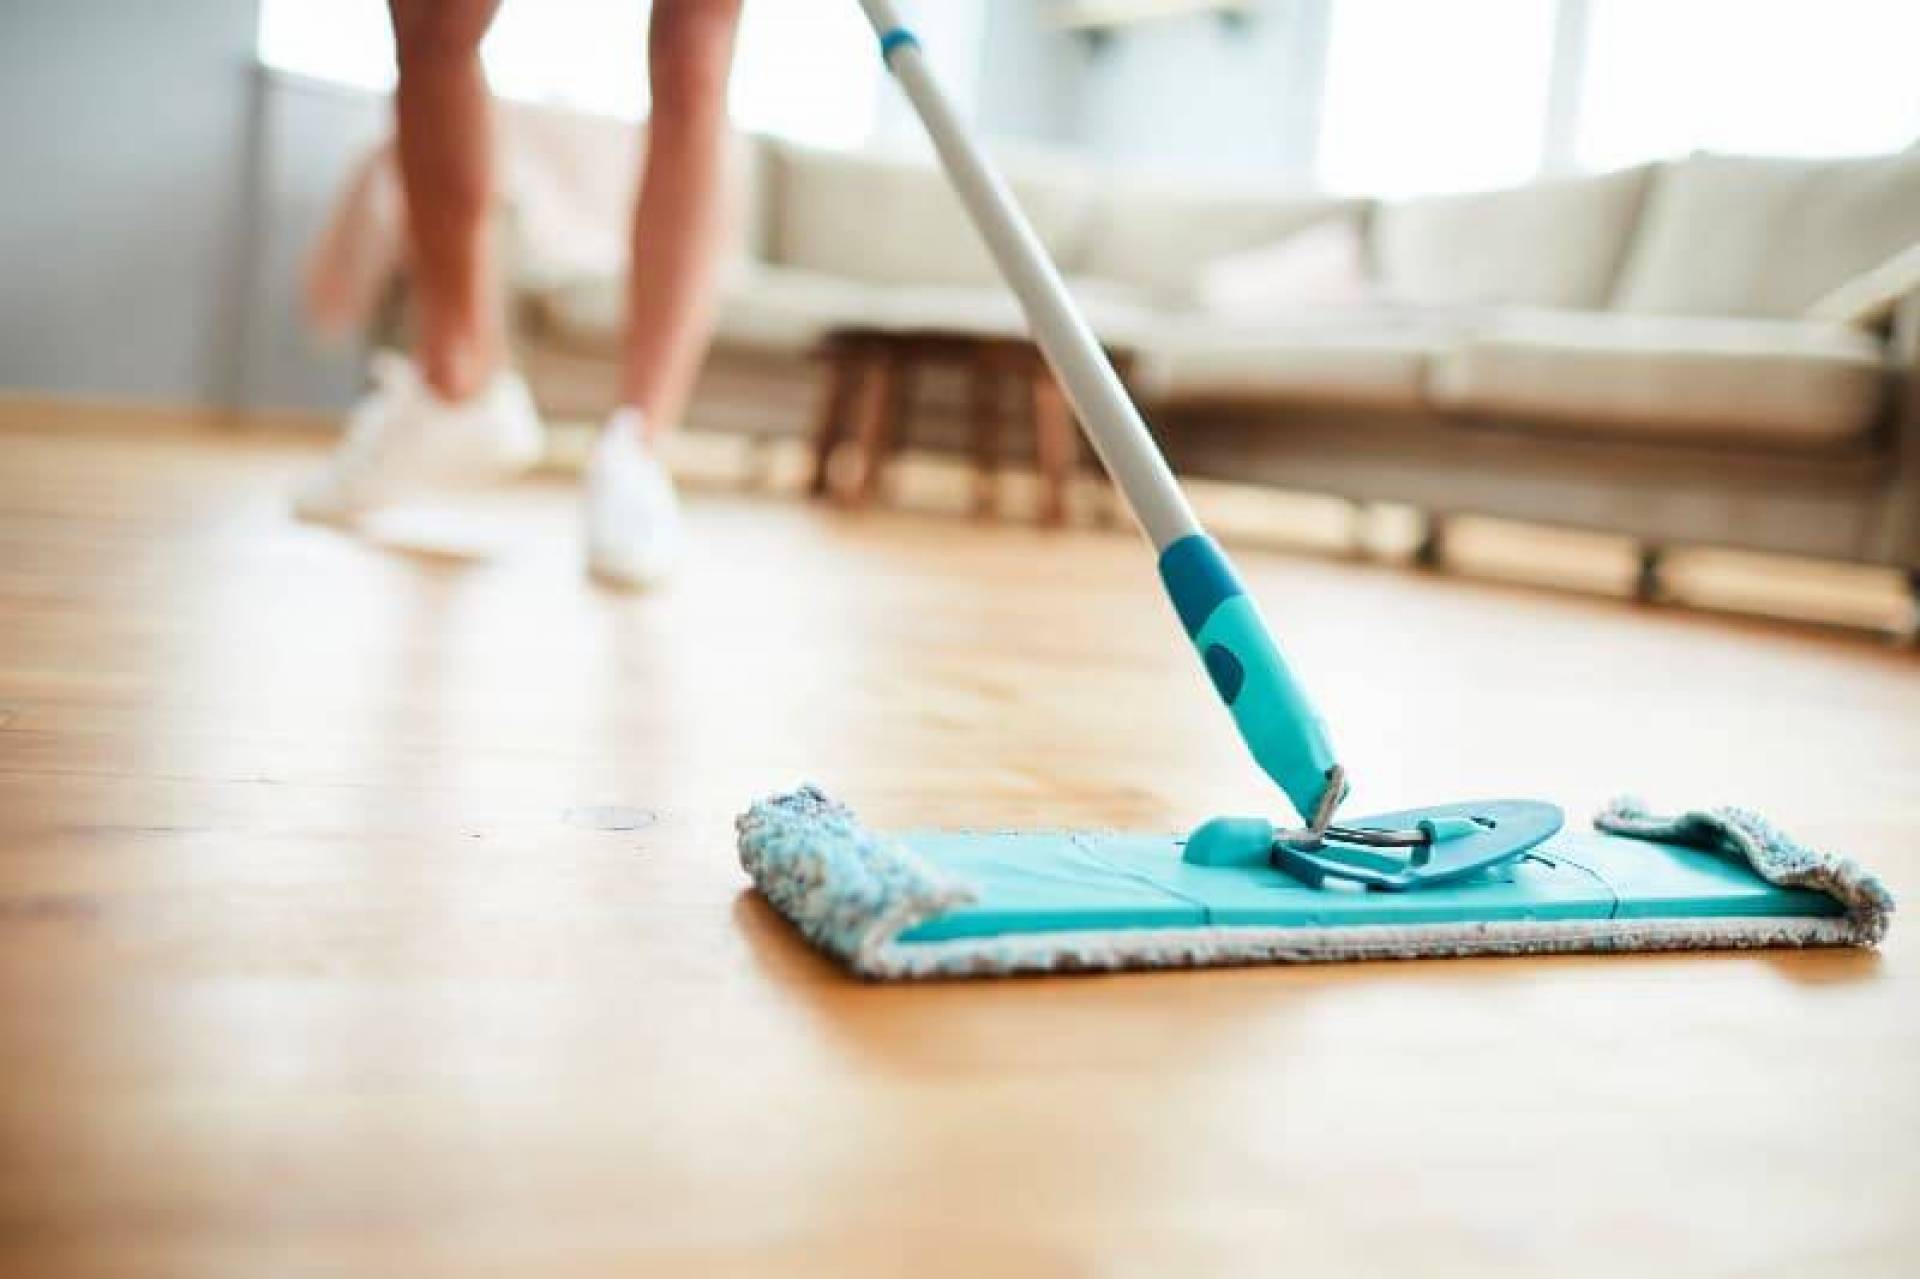 5 WAYS YOU’RE UNINTENTIONALLY RUINING WOODEN FLOORS